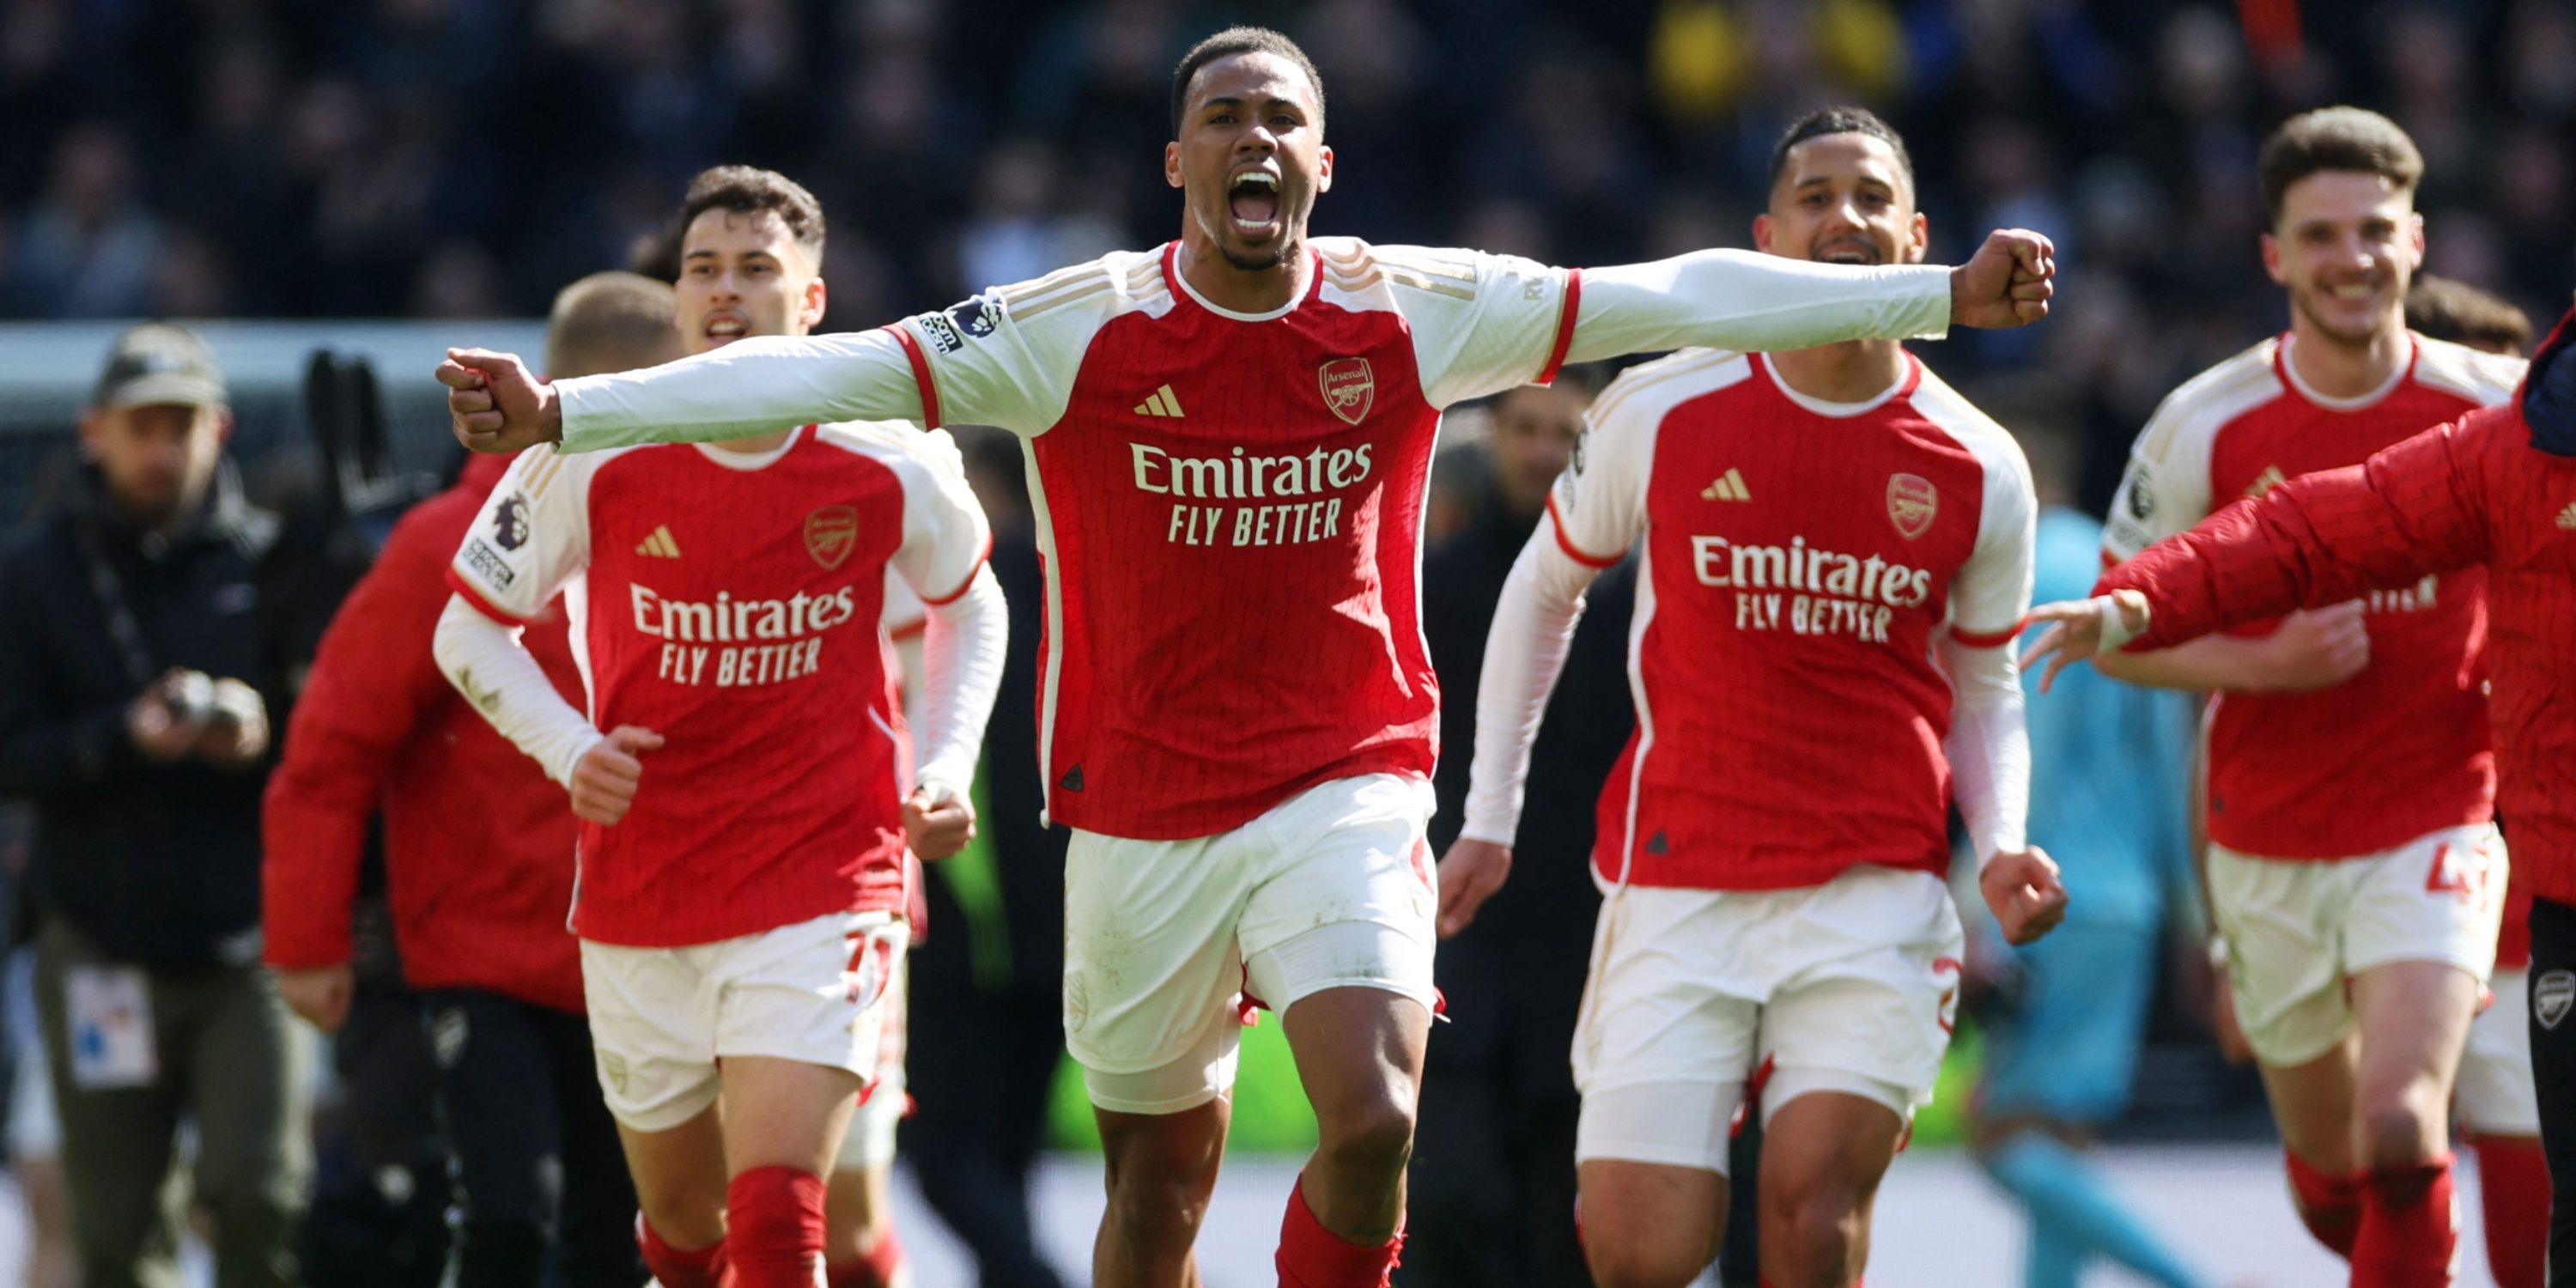 Arsenal players celebrate after beating Tottenham